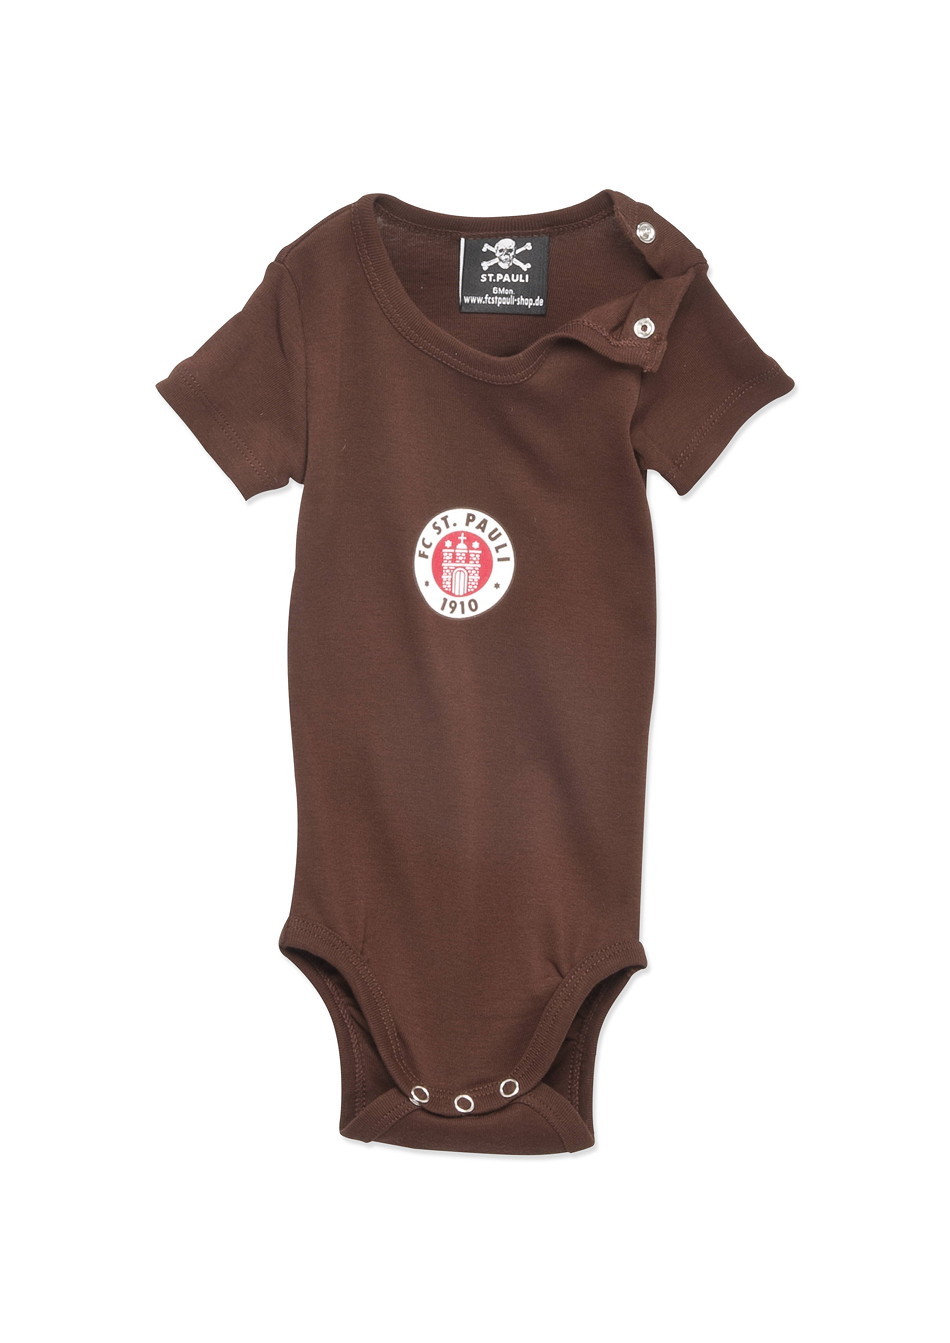 Baby bodysuit with logo, brown